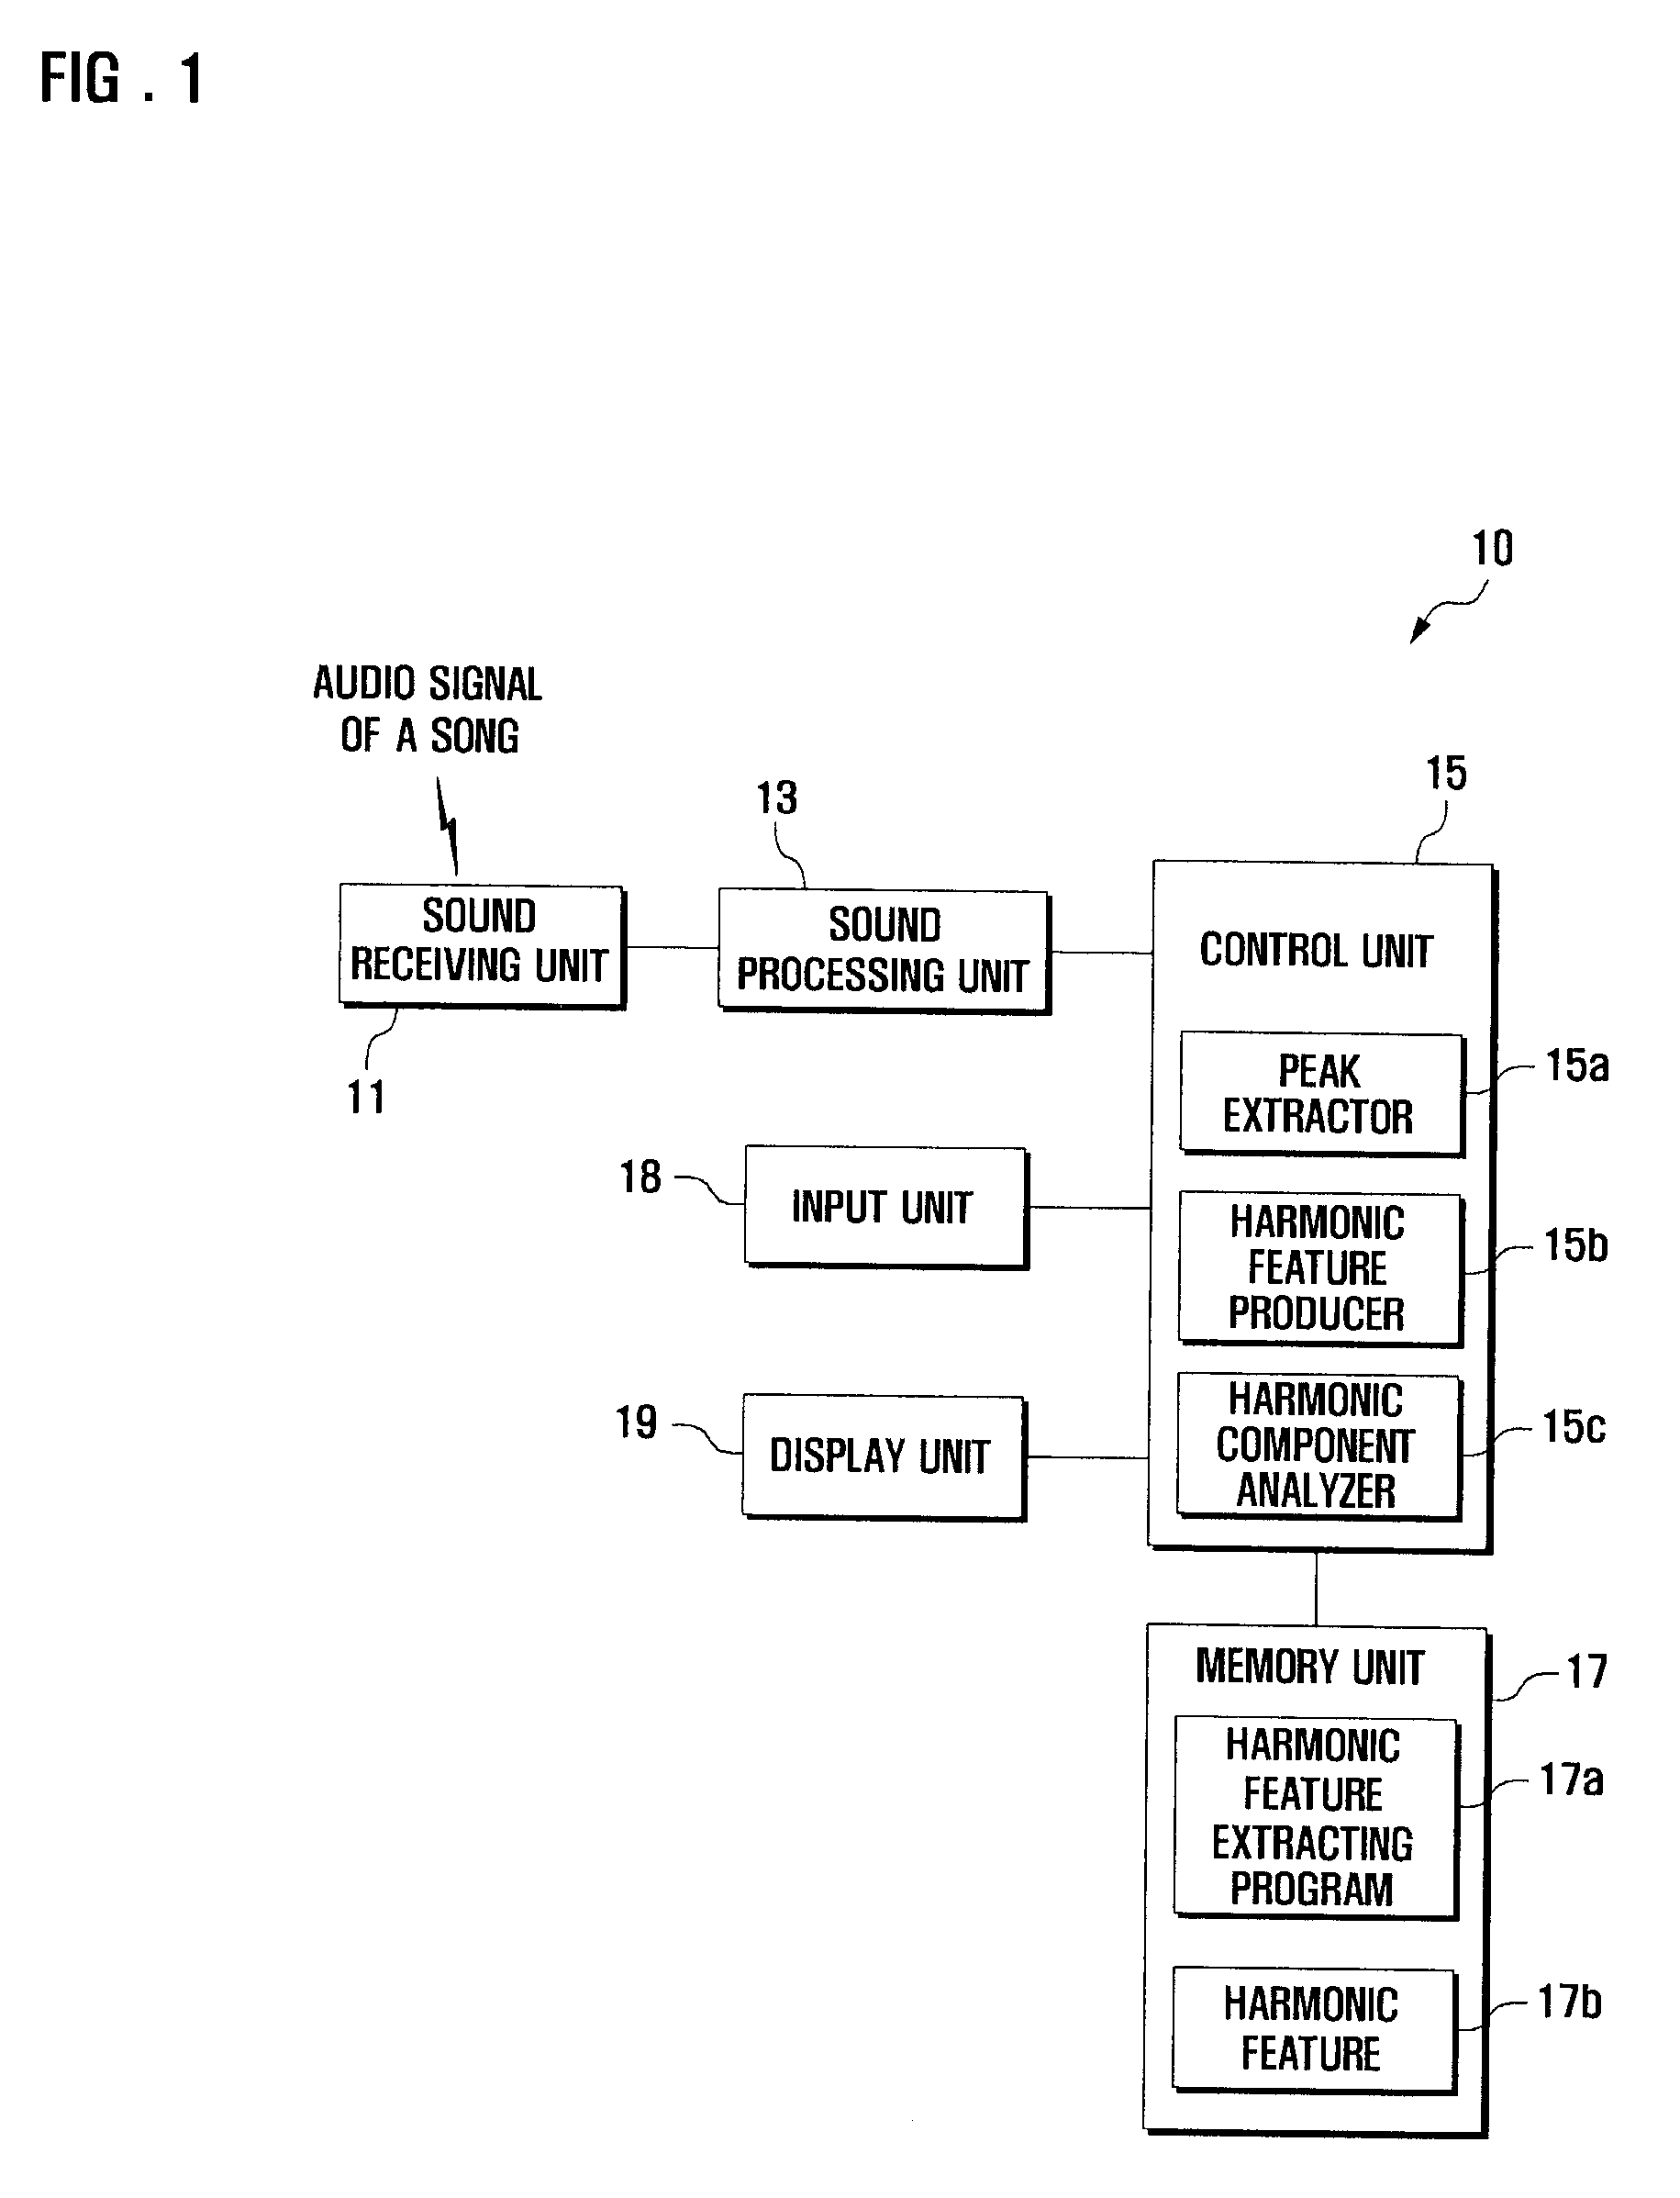 Music recognition method based on harmonic features and mobile robot motion generation method using the same